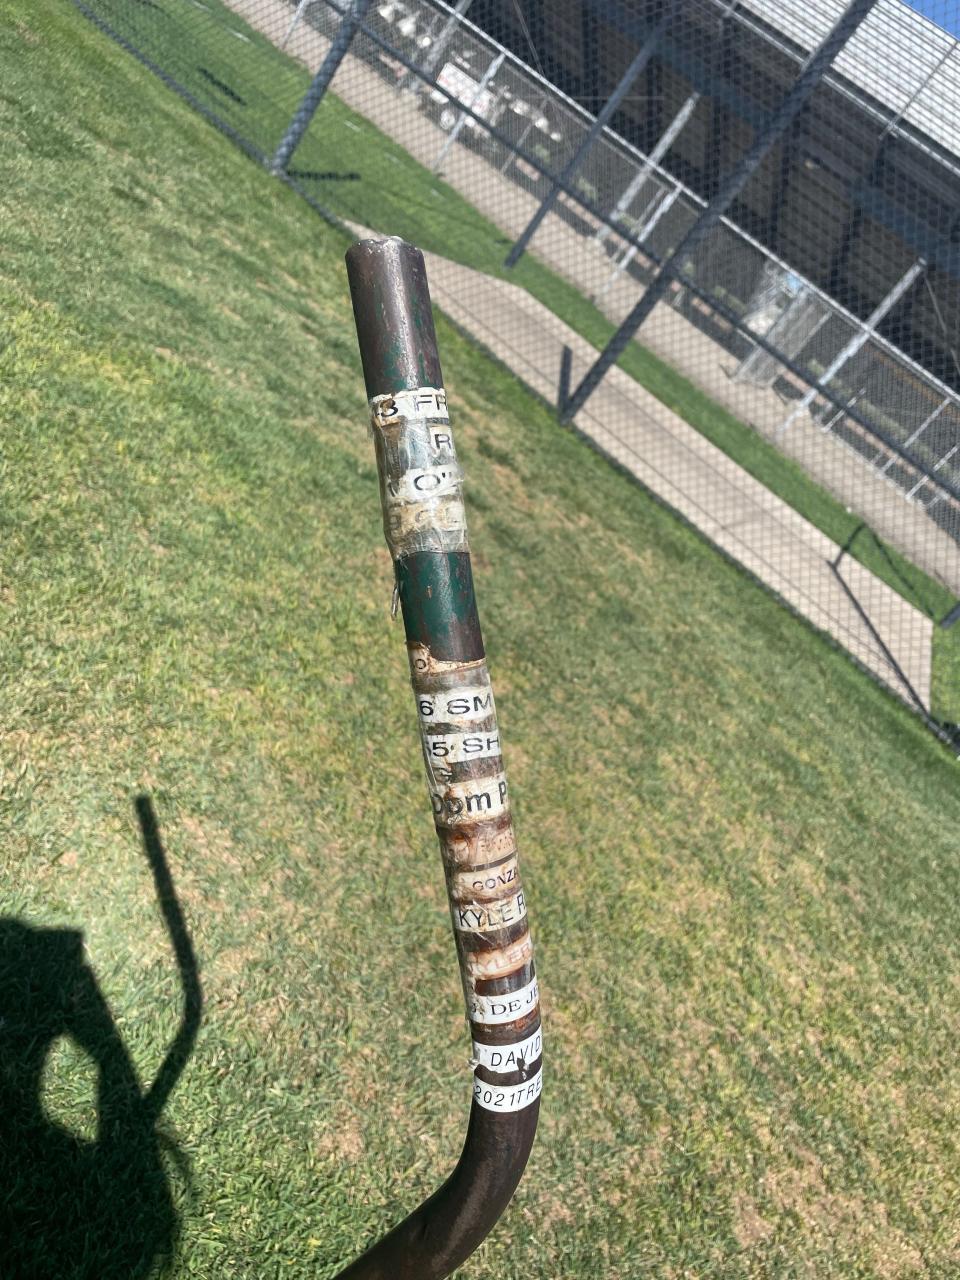 Wrapped around the top of the Manteca football's Sheppard stick are the names of the past people who were chosen by the team to be that year's Sheppard.